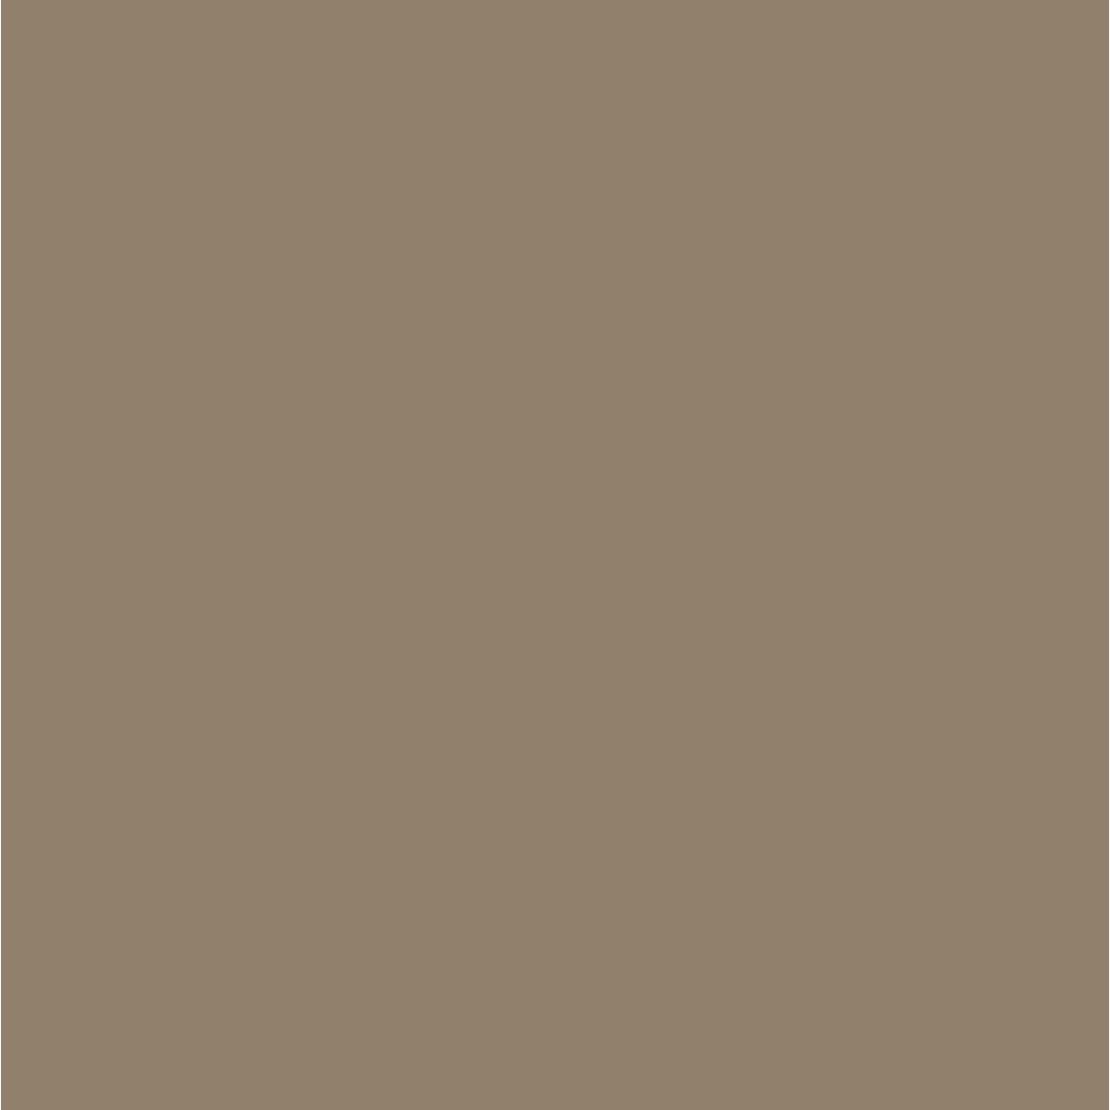 French Taupe Swatch Sample